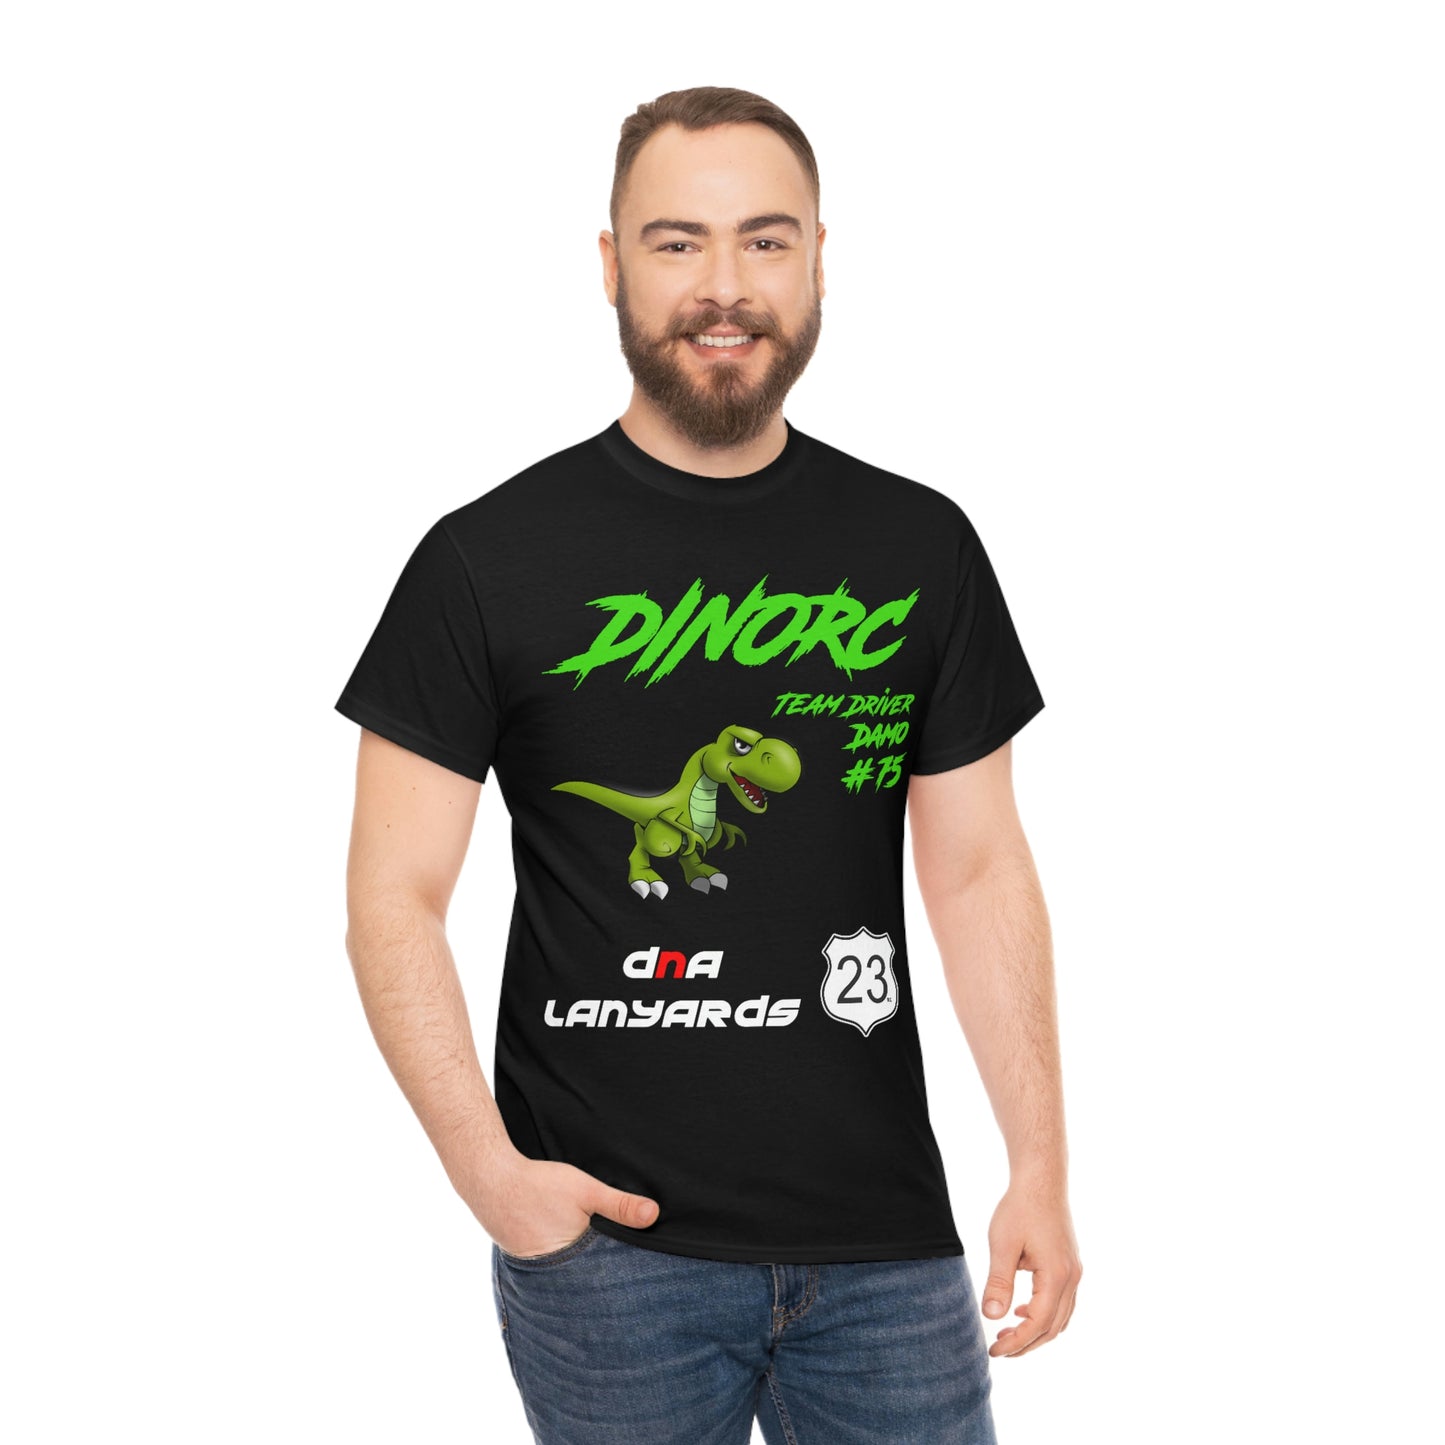 Team Driver DNA Lanyards   Front and Back DinoRc Logo T-Shirt S-5x 5 colors